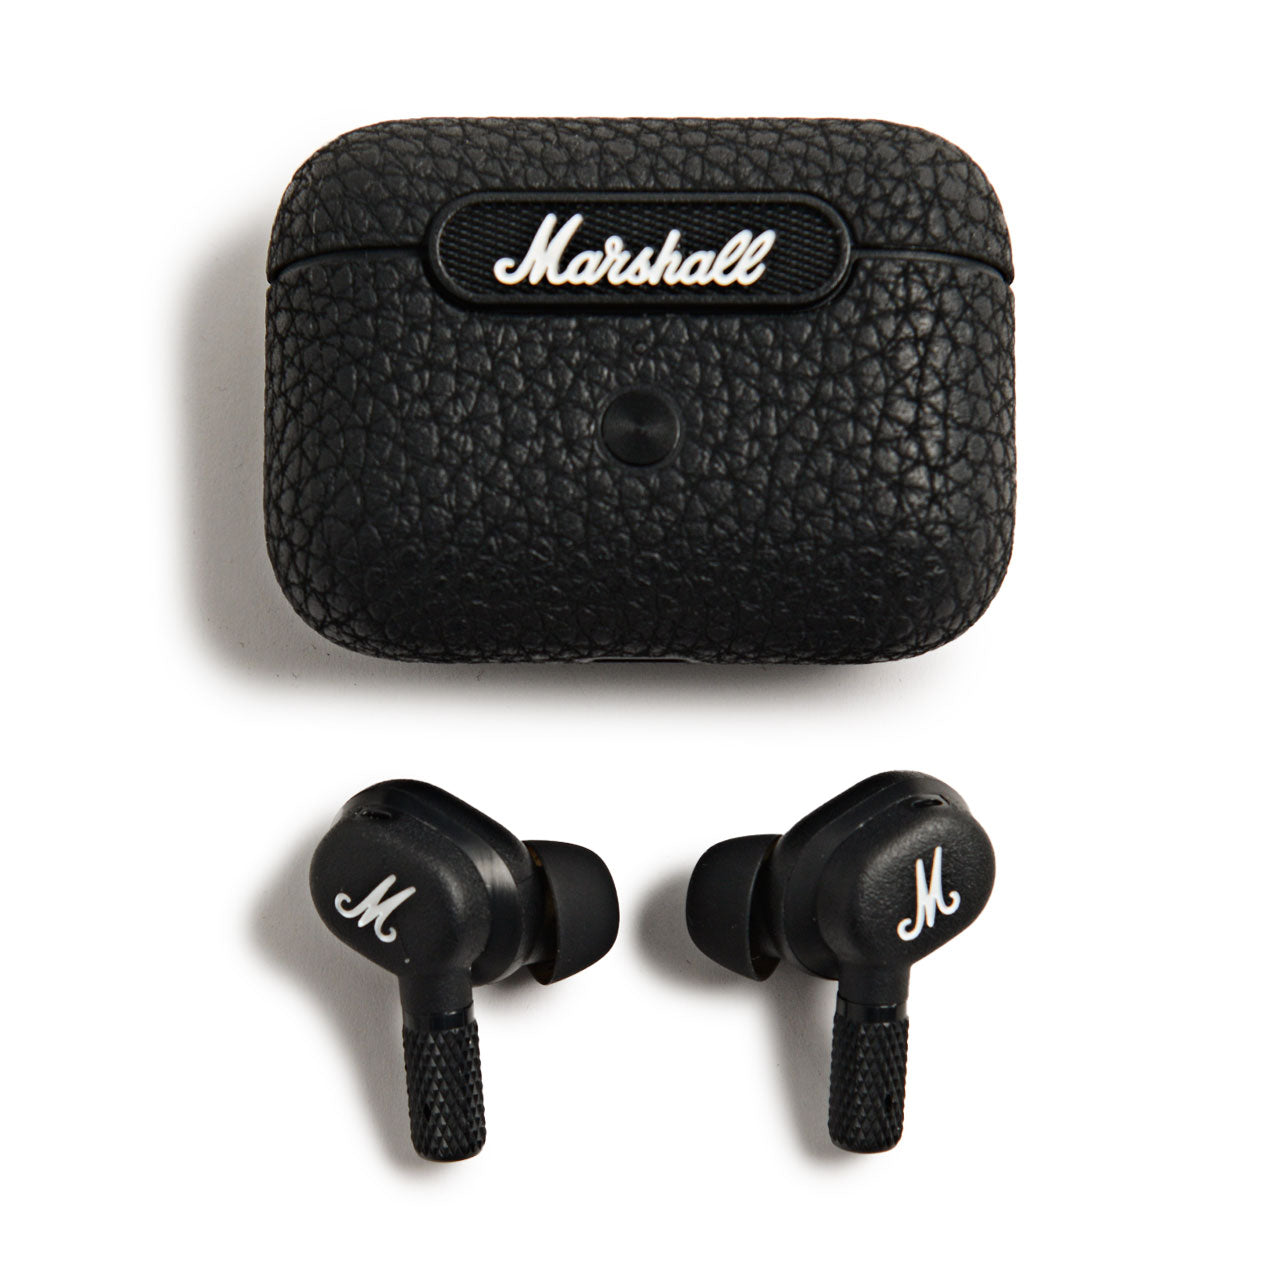 Marshall Motif ANC Earbuds | Uncrate Supply